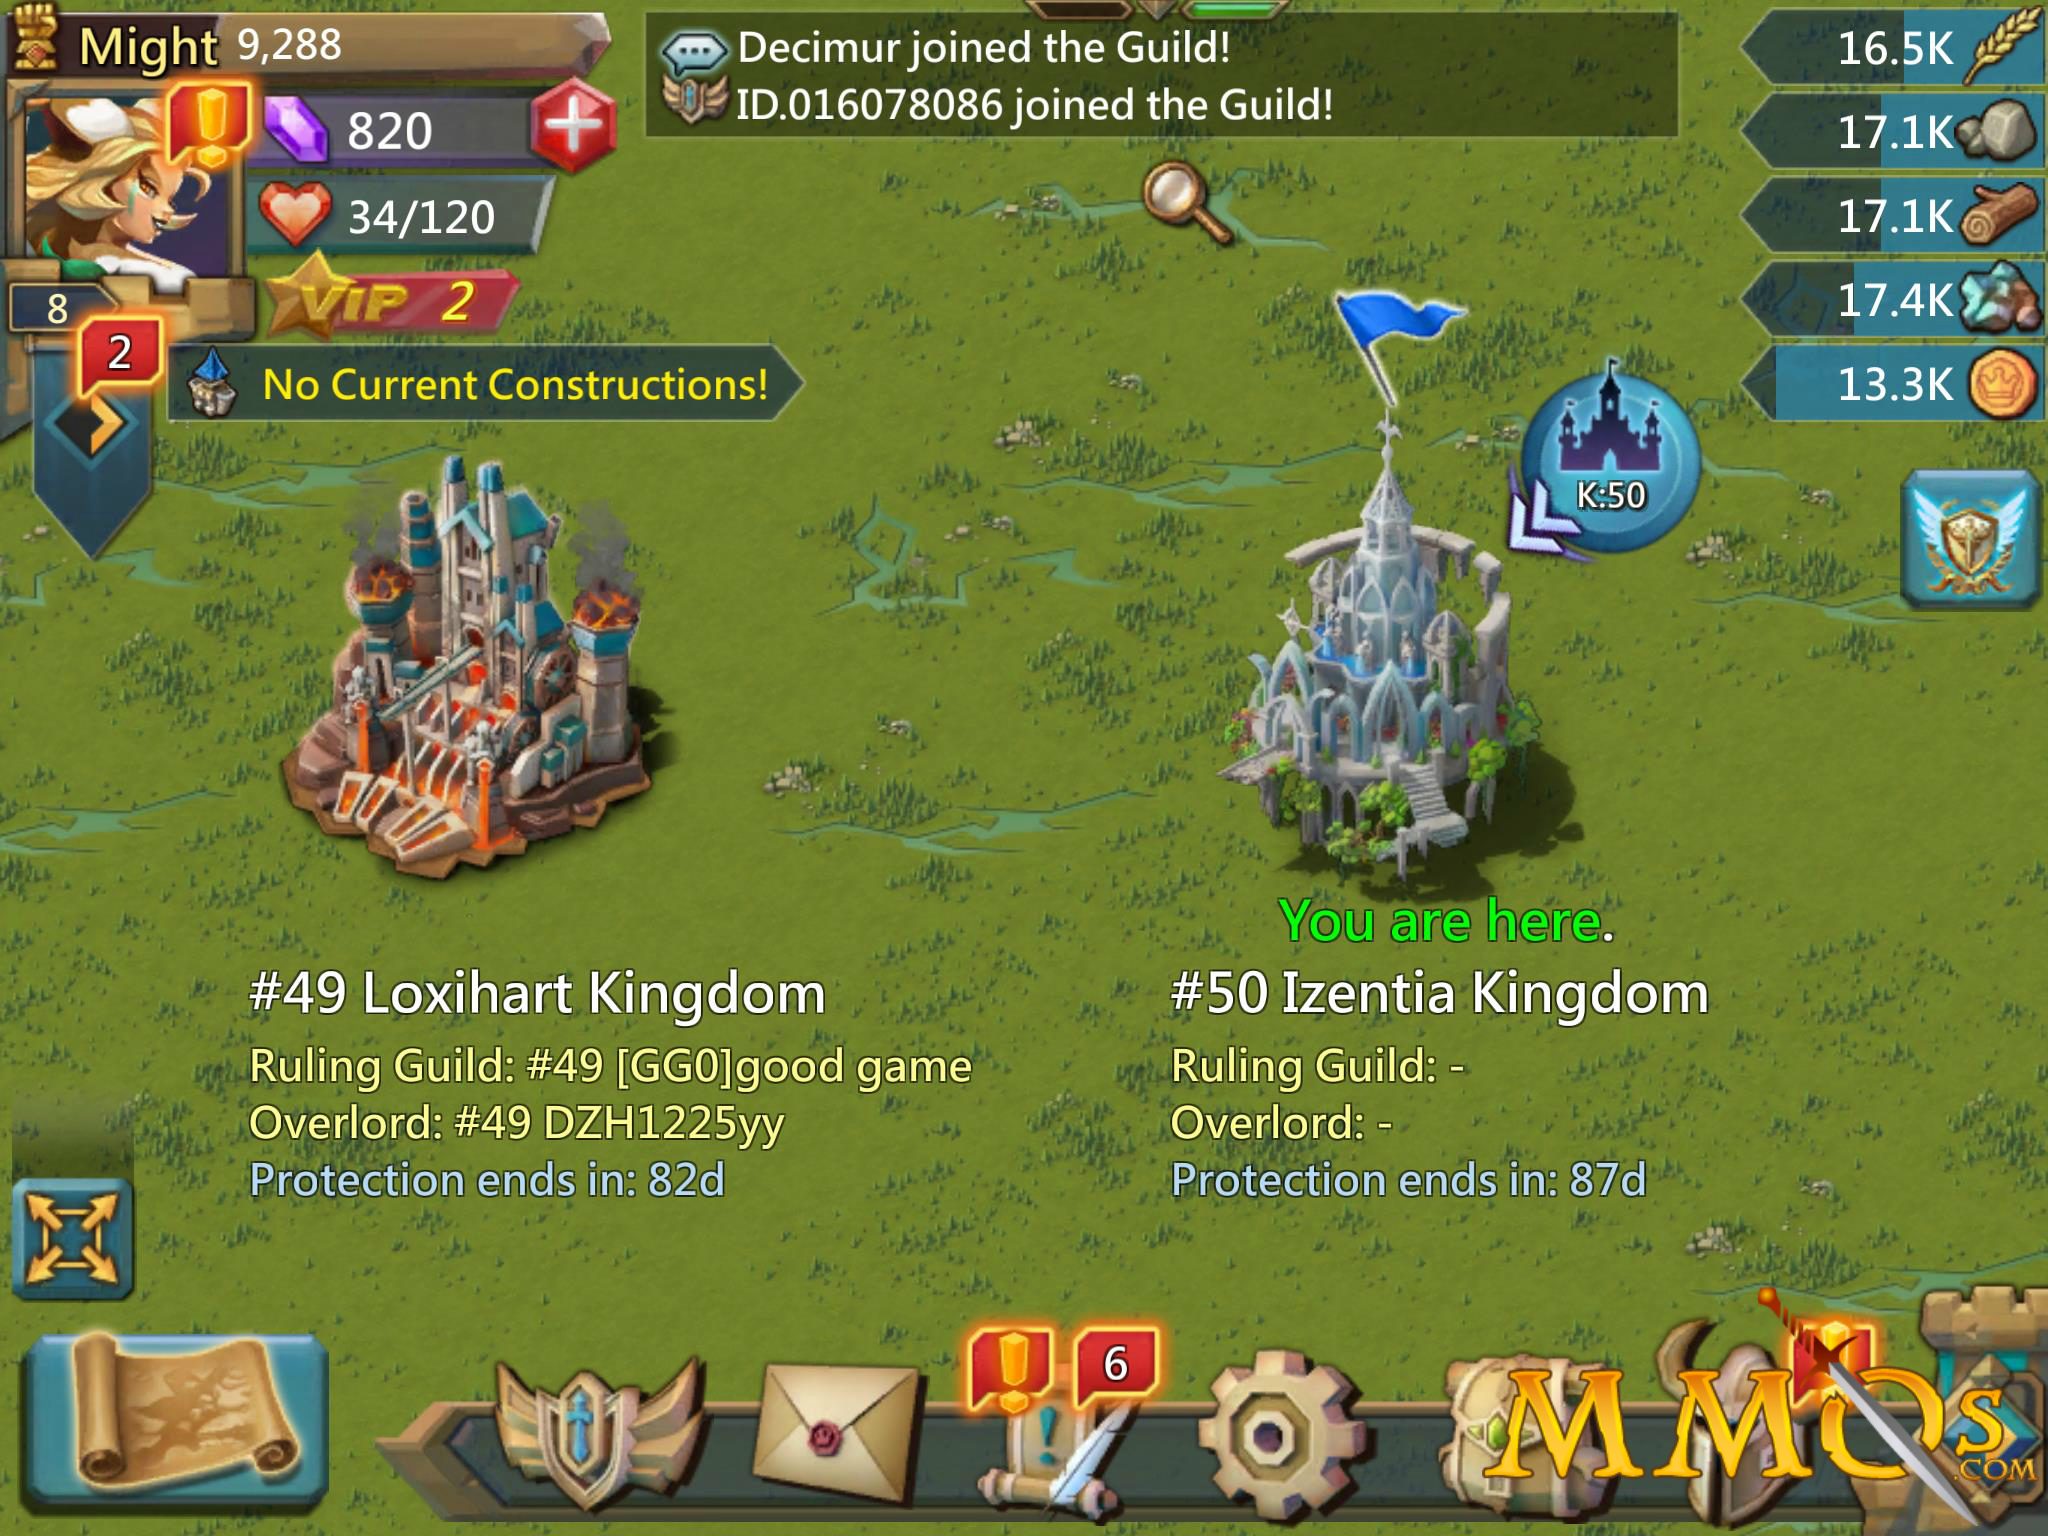 Review of Lords Mobile - Is it Good or Bad?